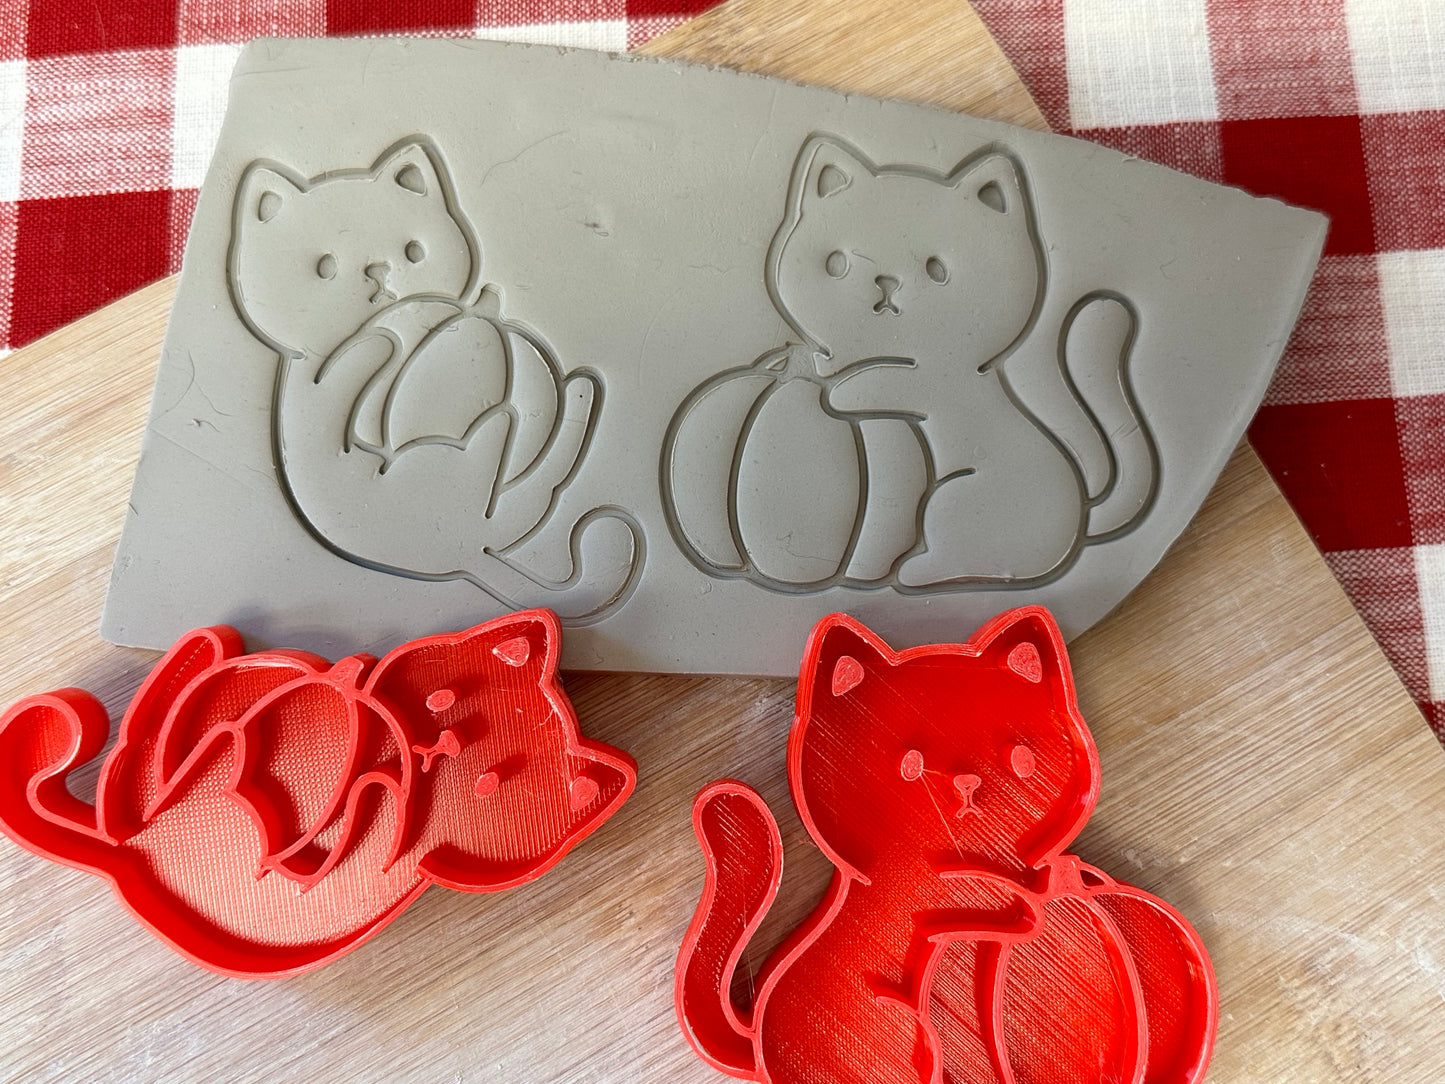 Fall Cat with Pumpkin Pottery Stamp - 3D Printed, each or set